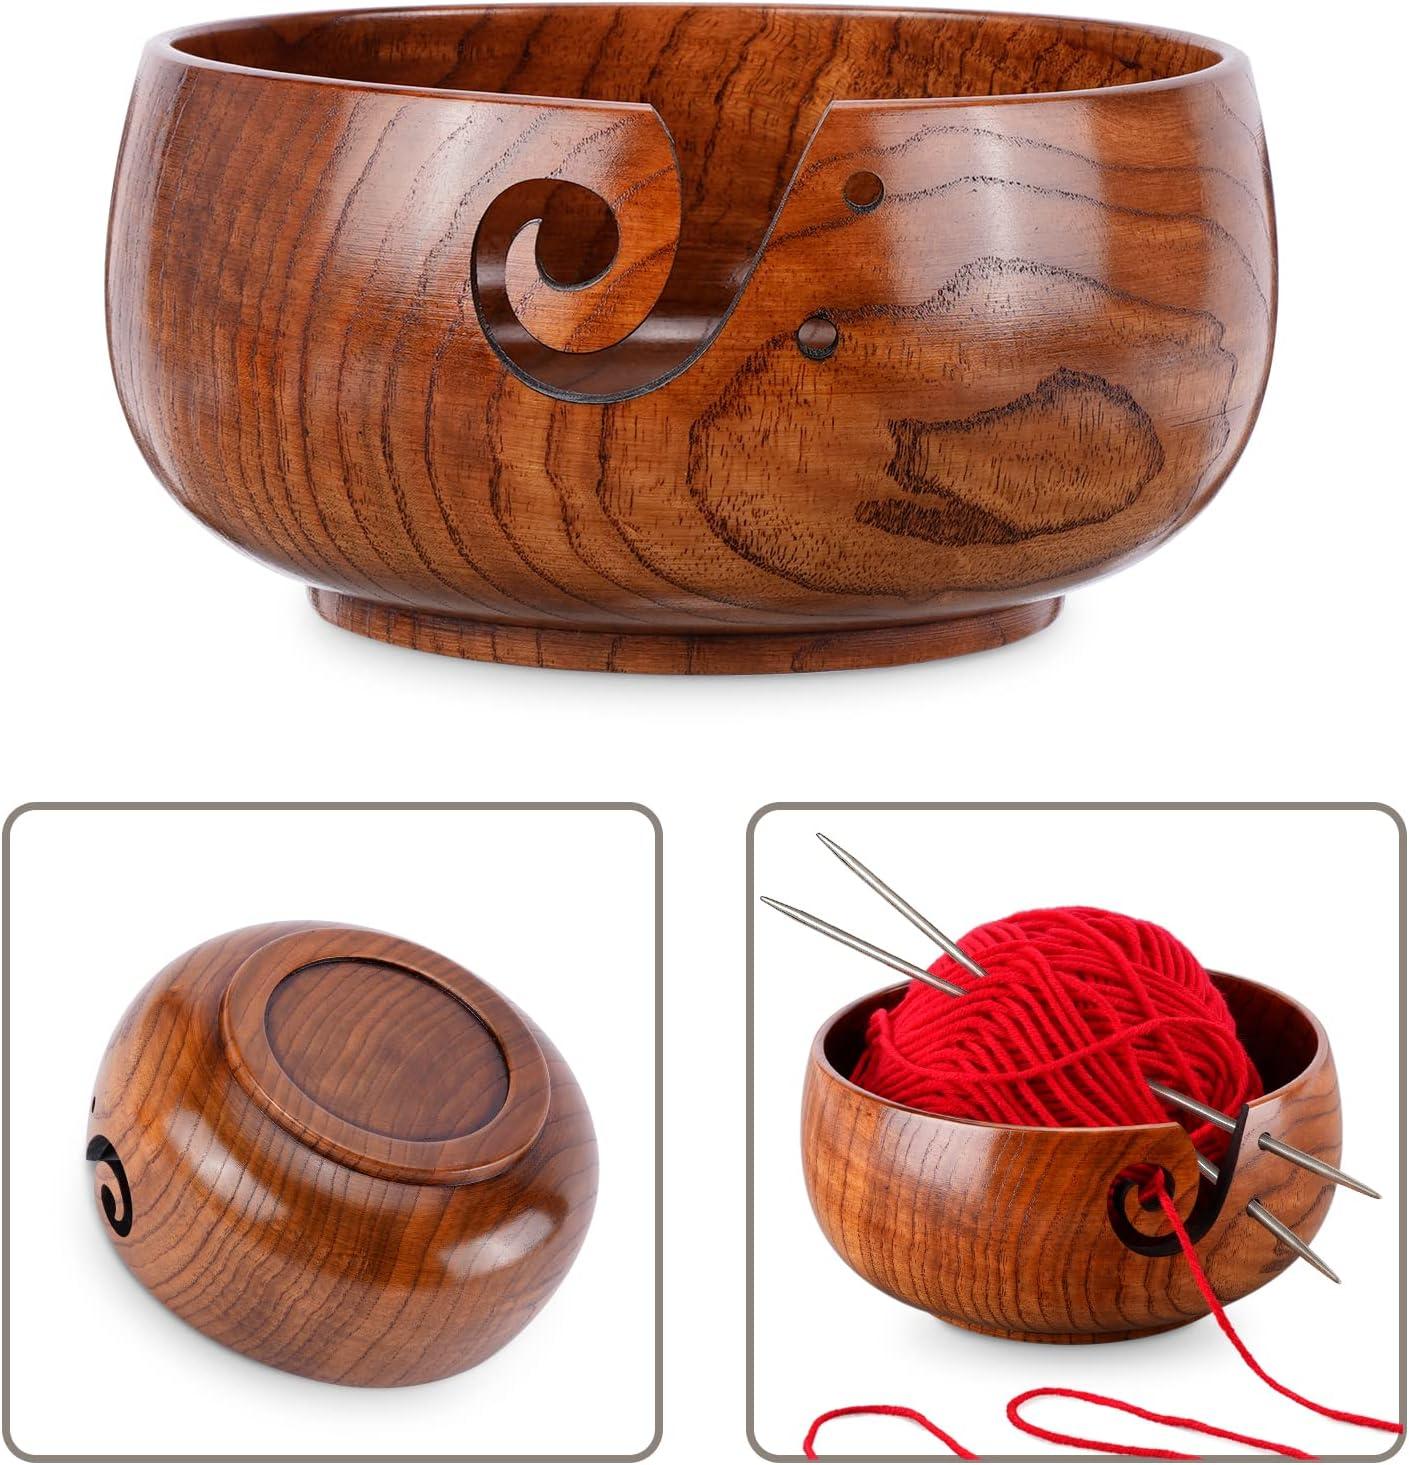 Crochet Bowl Large Wooden Yarn Bowls With Holes Handmade Round